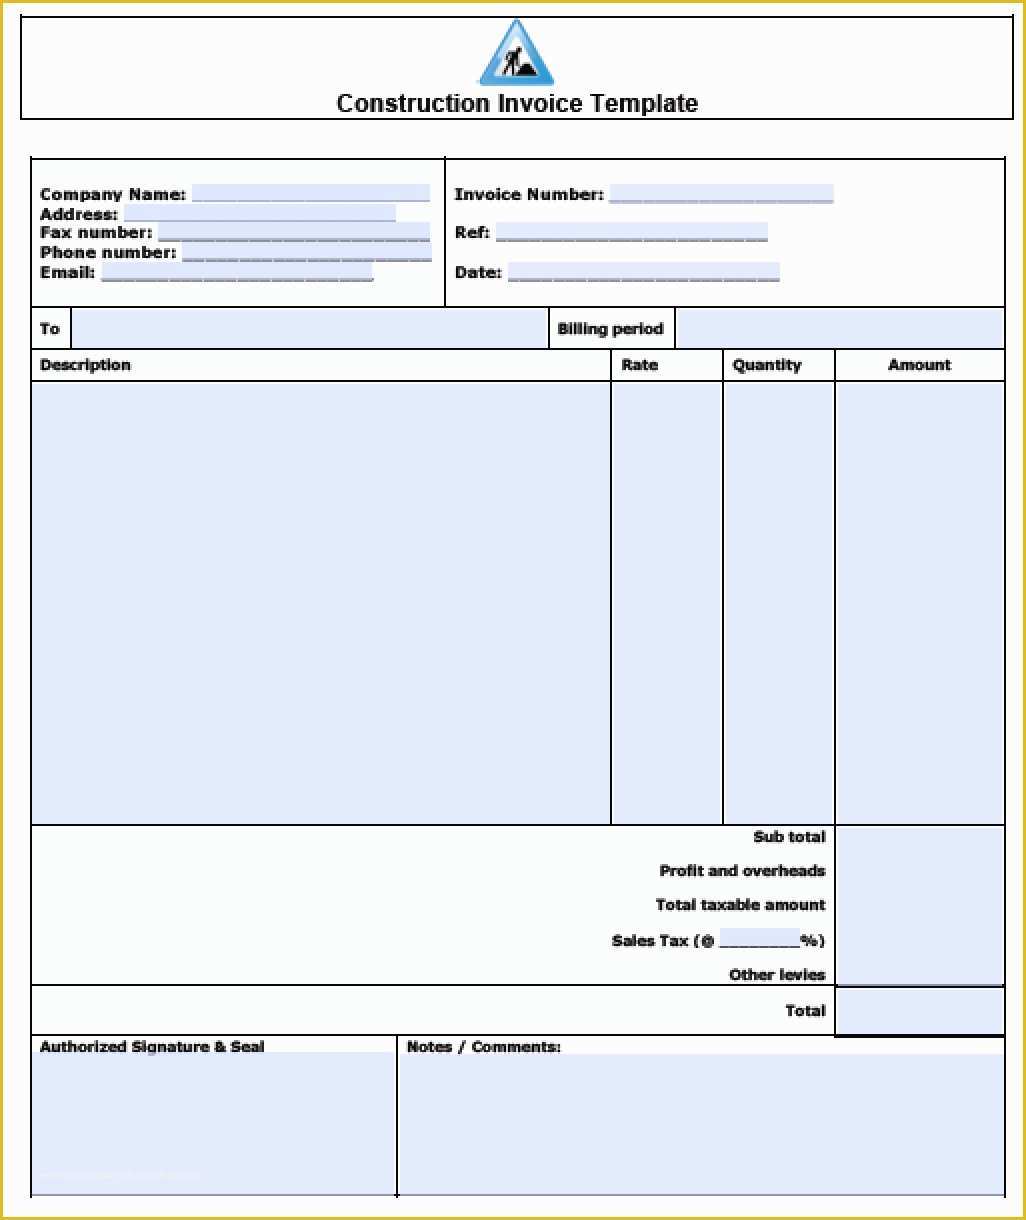 Free Contractor Invoice Template Pdf Of Construction Invoice Template